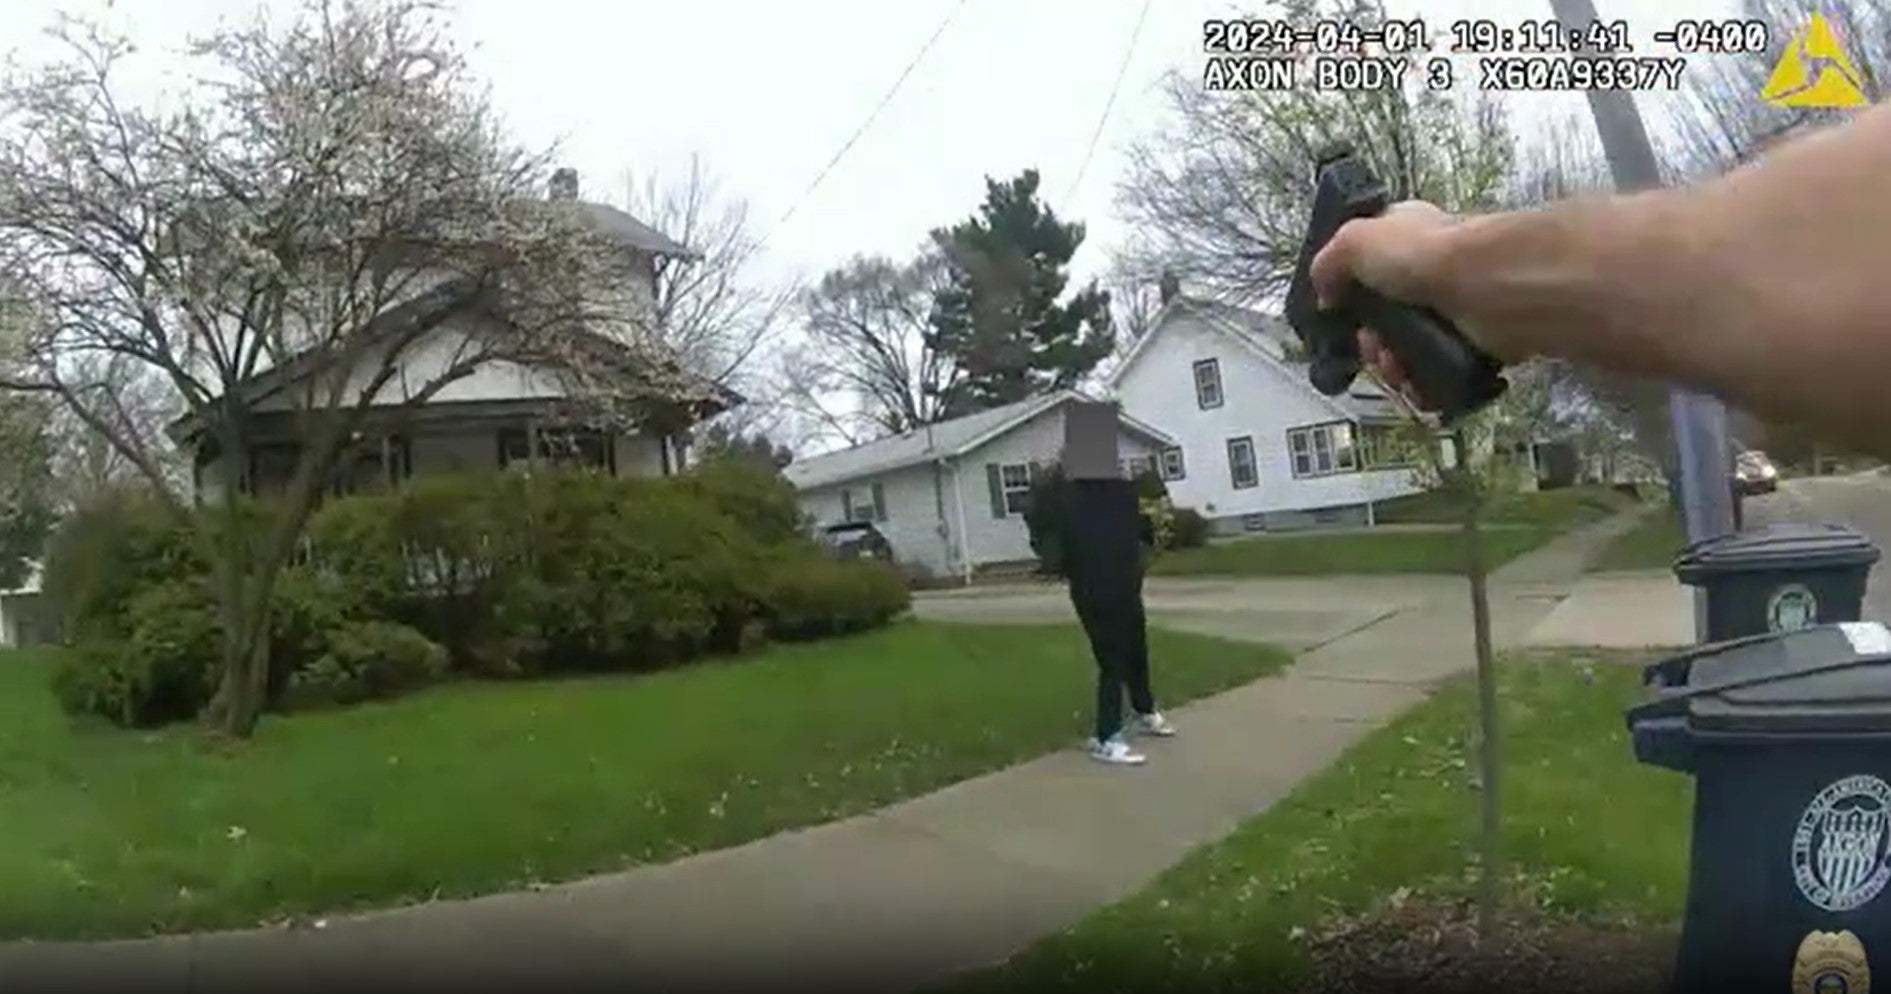 Officer Ryan Westlake’s body-worn camera footage shows him shooting a 15-year-old boy who had a toy gun on April 1 2024